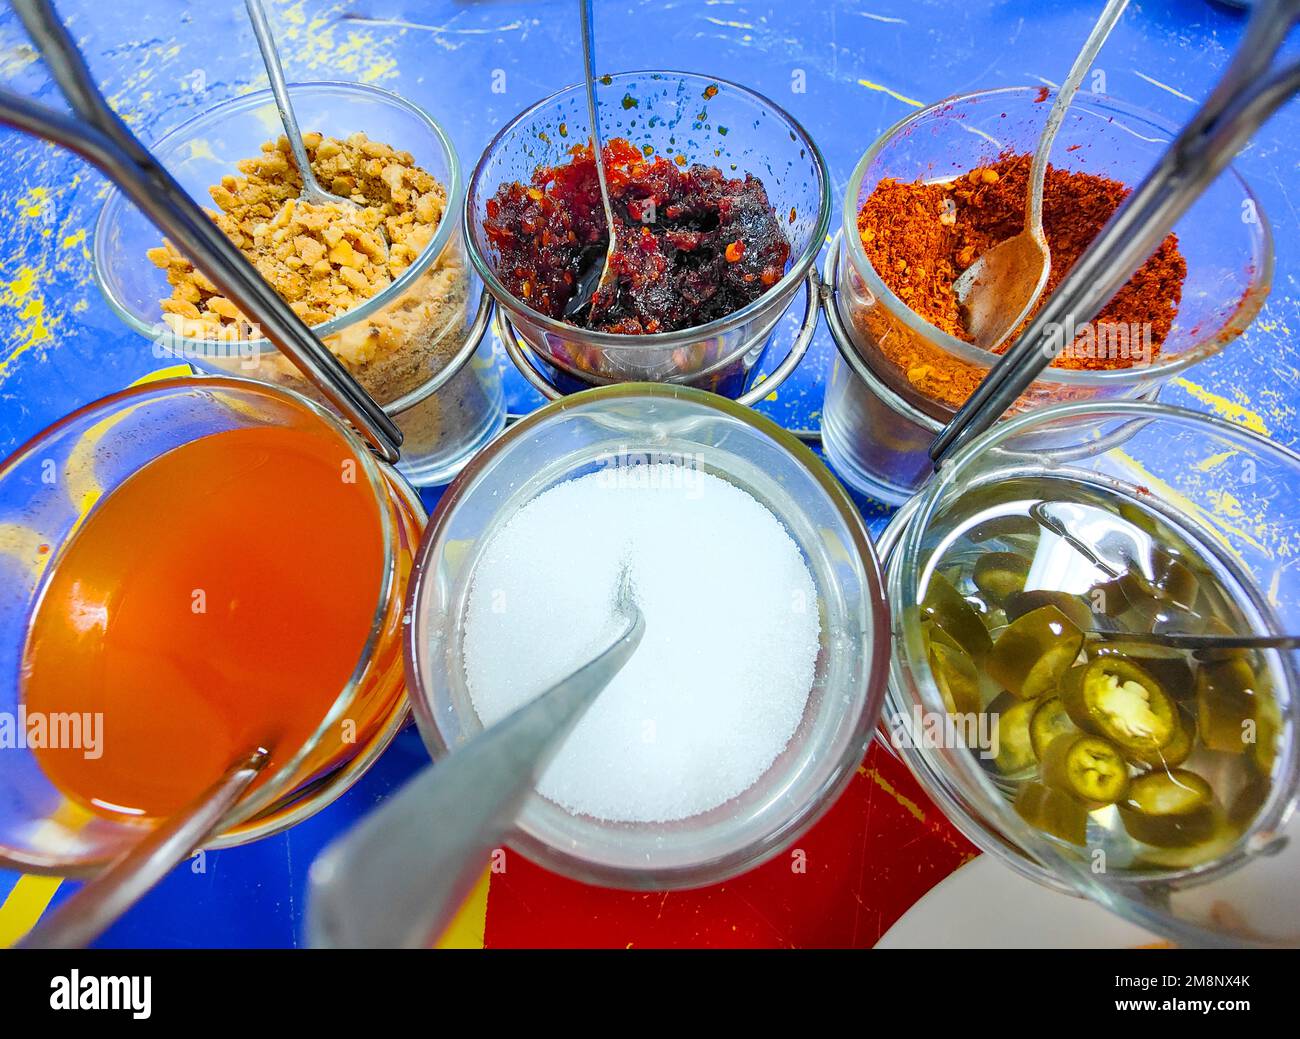 Glass bowls containing ground peanuts,sweet chilli paste,pickled chilli,sweet sauce,sugar and chilli flakes,to sprinkle on your food. Stock Photo